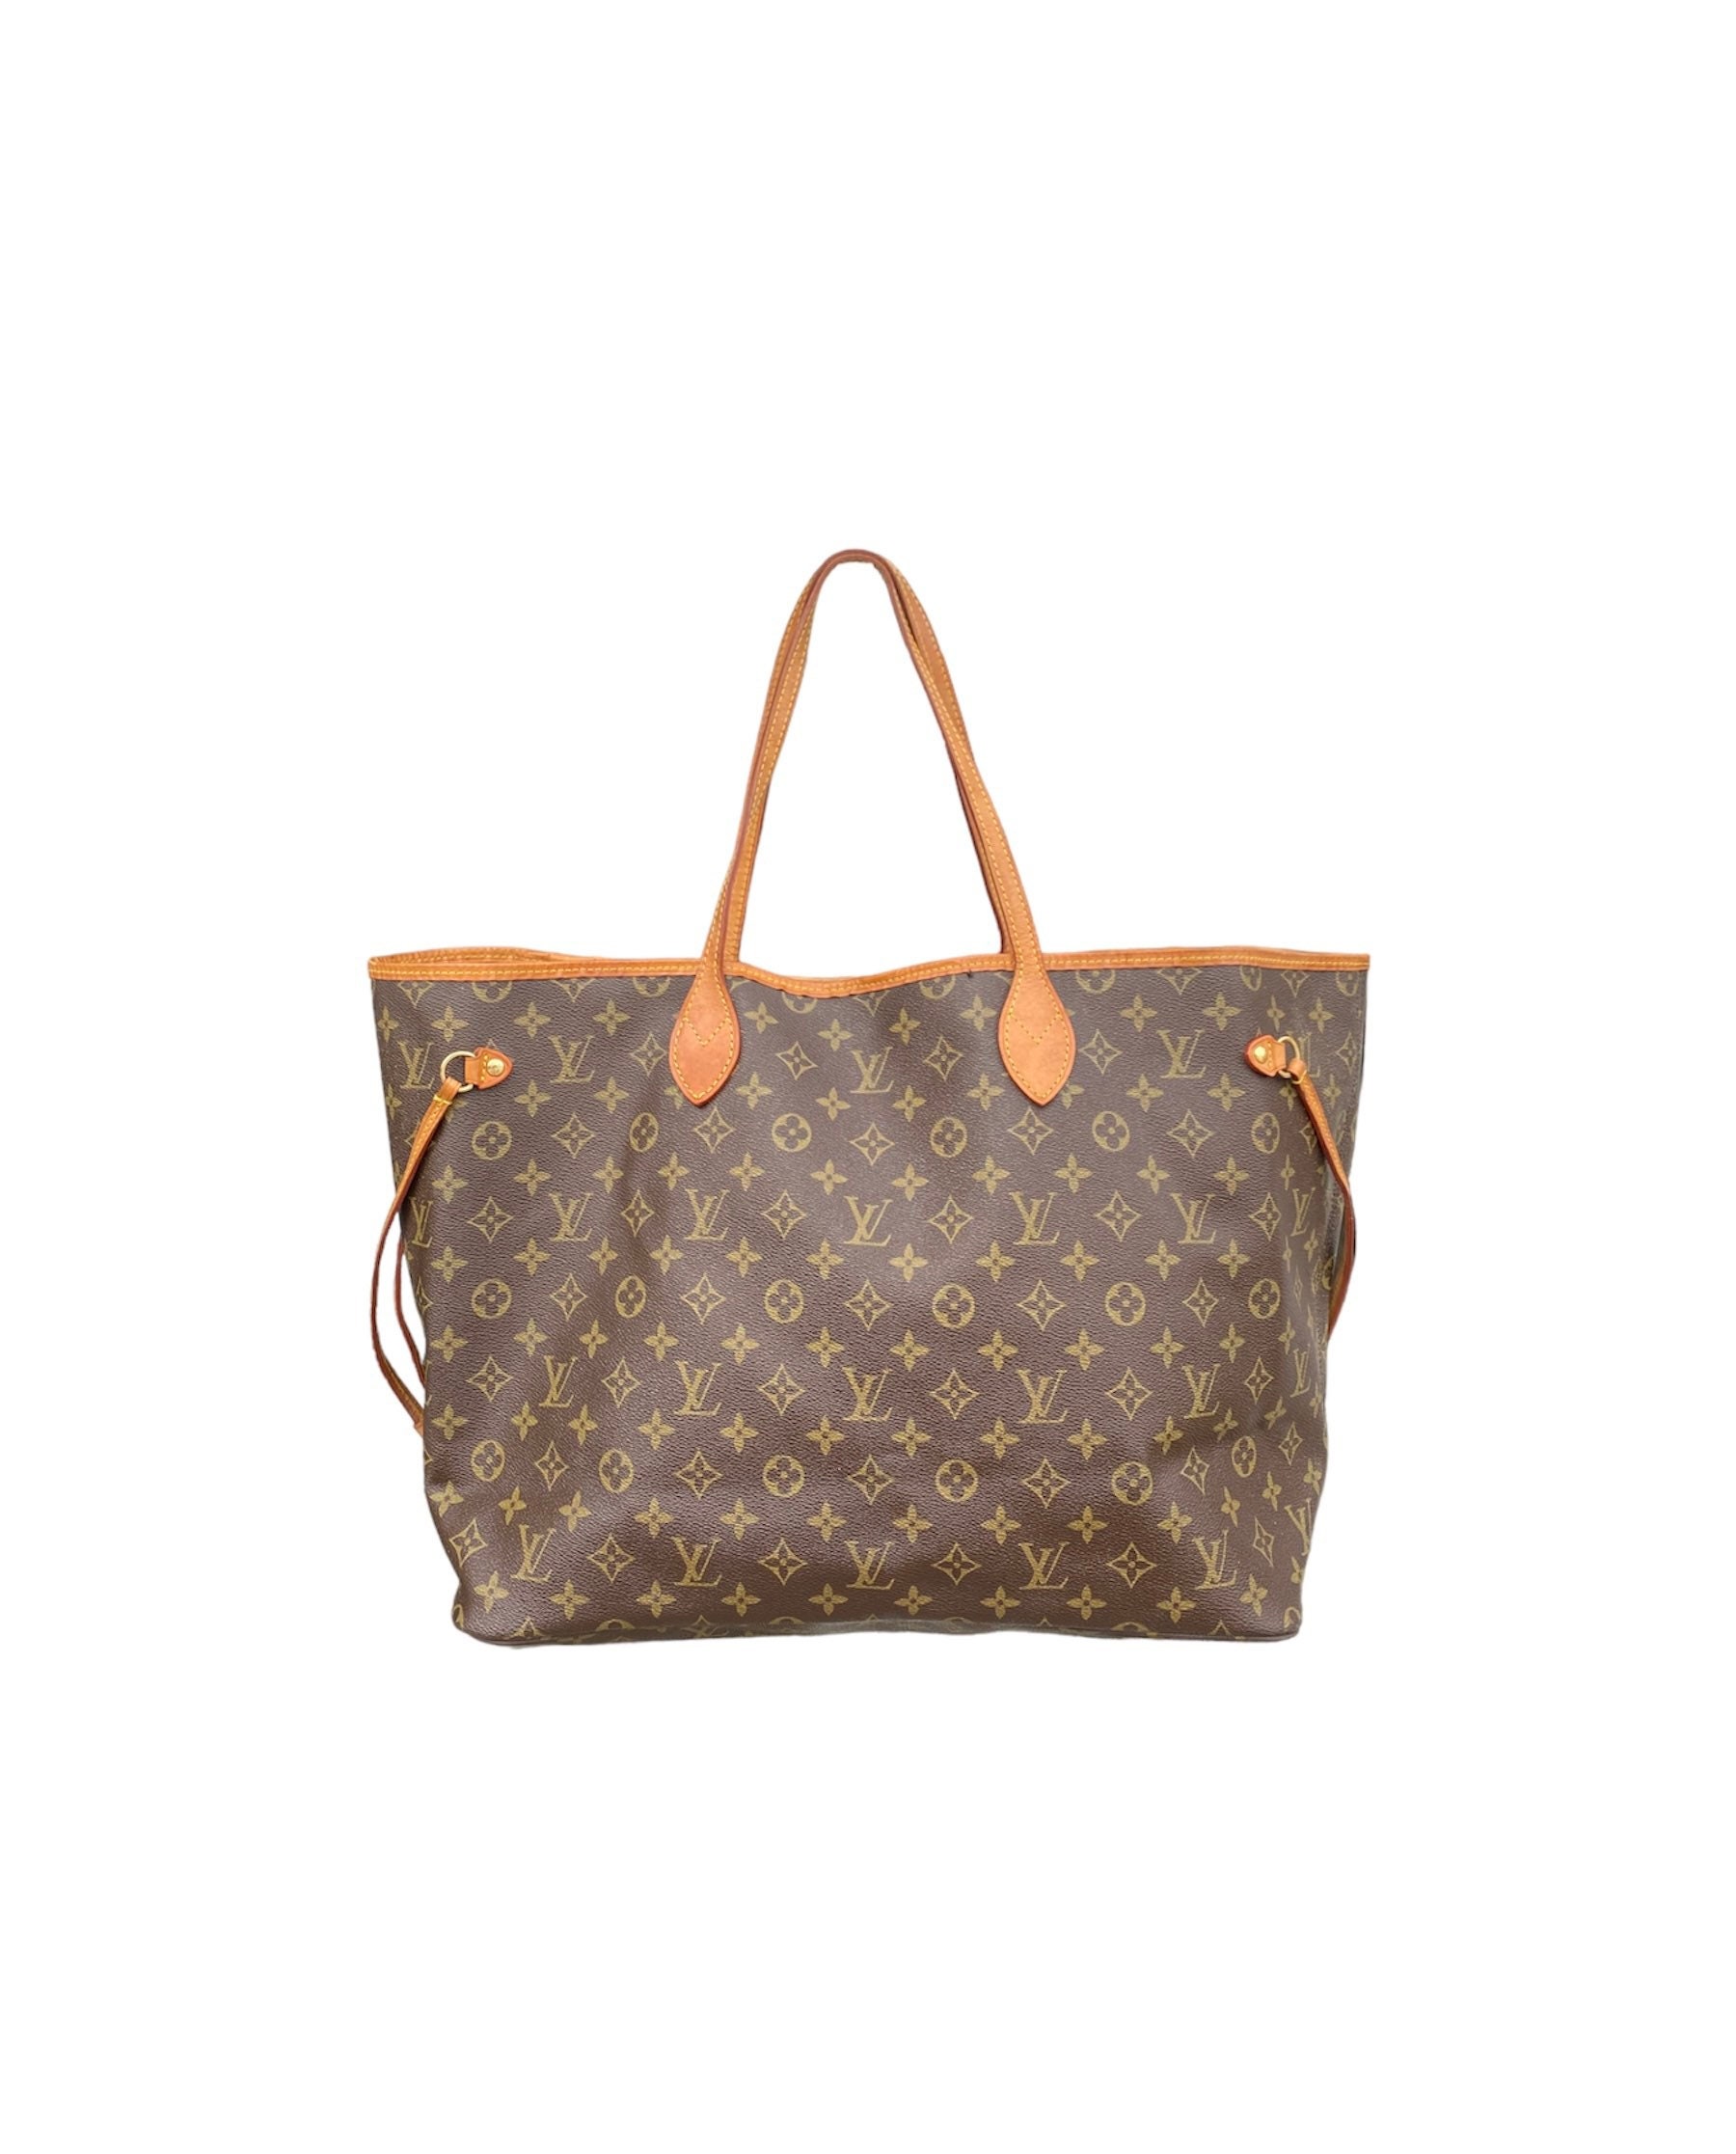 Bag and Purse Organizer with Singular Style for Louis Vuitton Neverfull